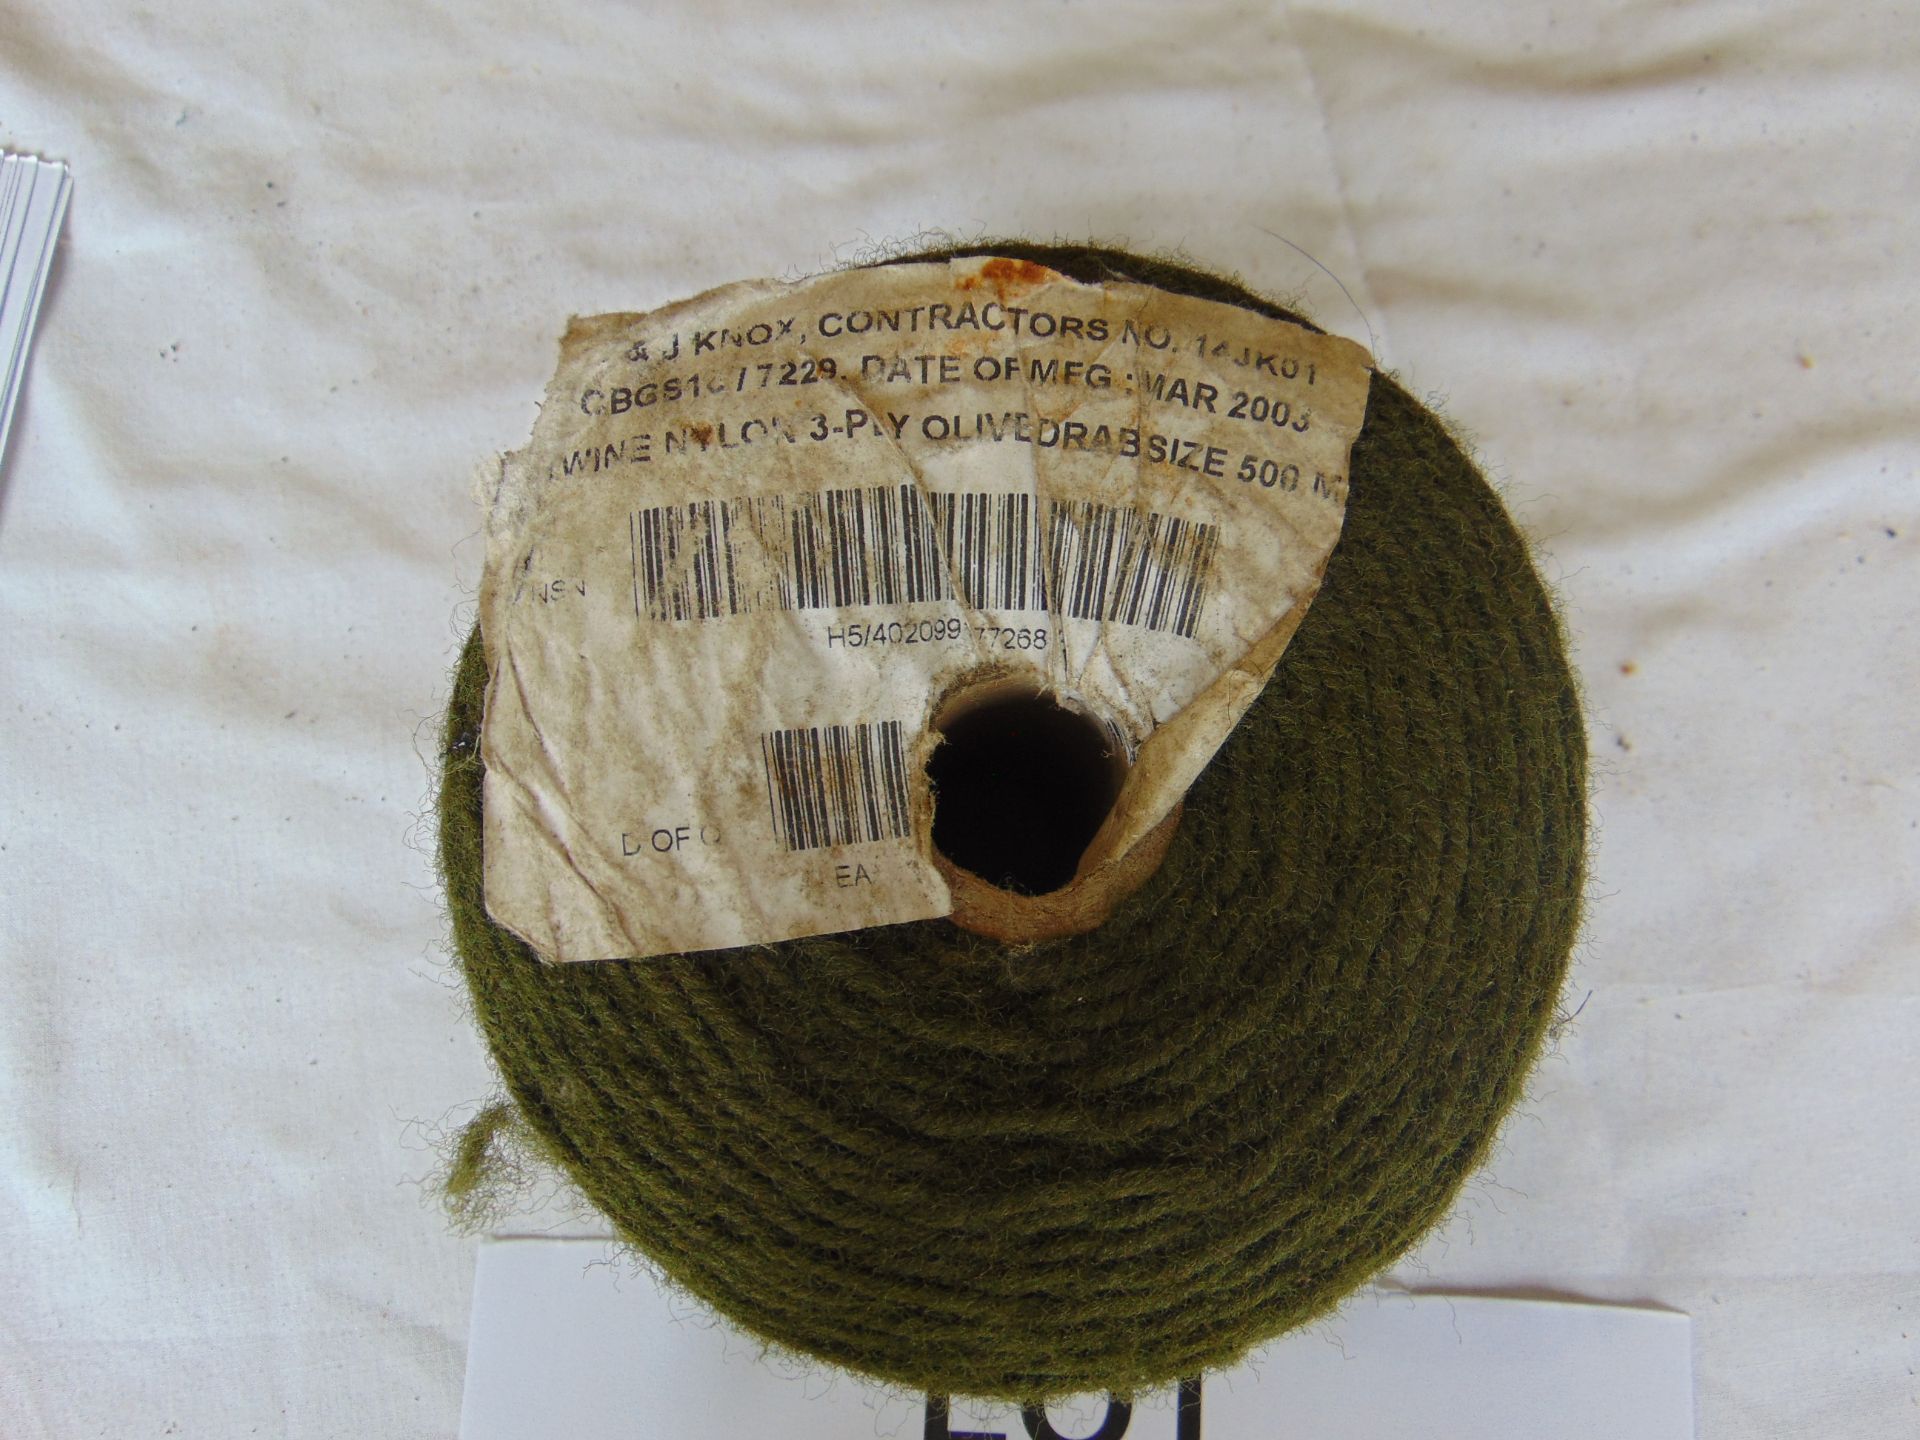 1 x Roll of 3 ply British Army Twine - Image 4 of 4